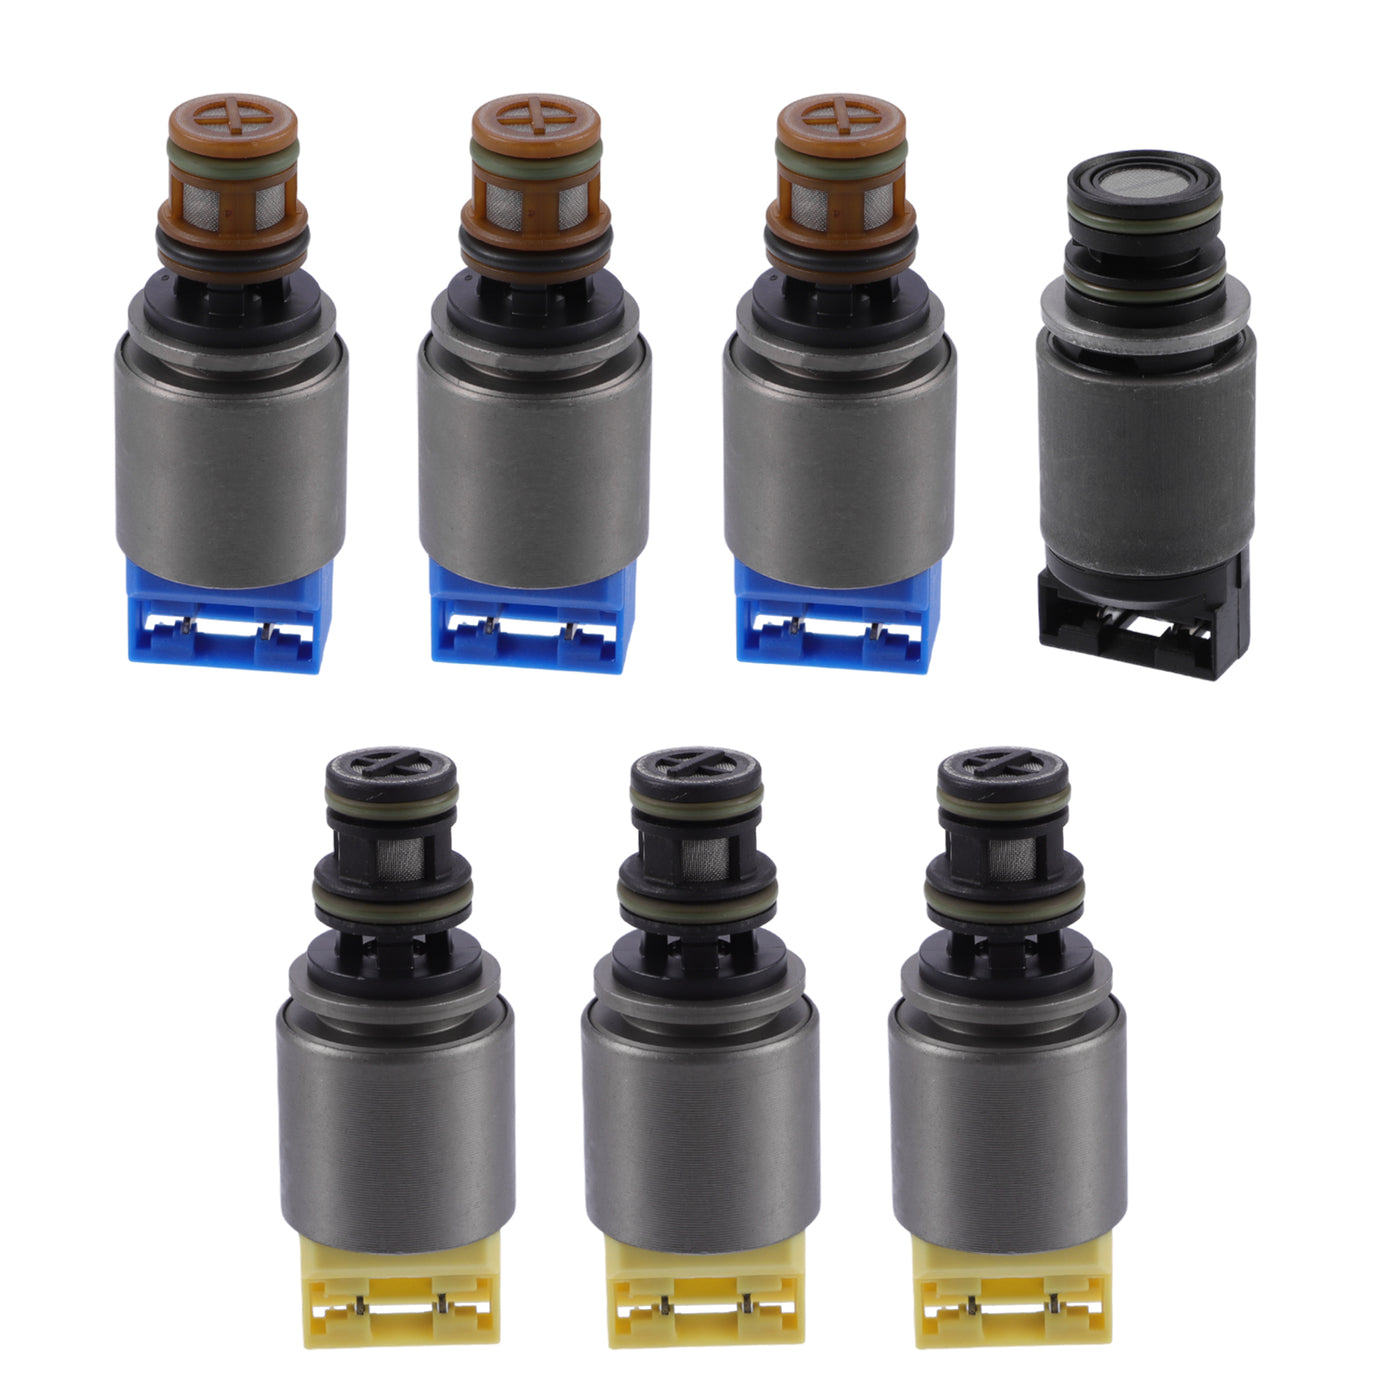 ACROPIX Engine Shift Control Gearbox Solenoid Valve Kit Fit for 6HP19 6HP26 6HP32 - Pack of 7 Titanium Tone